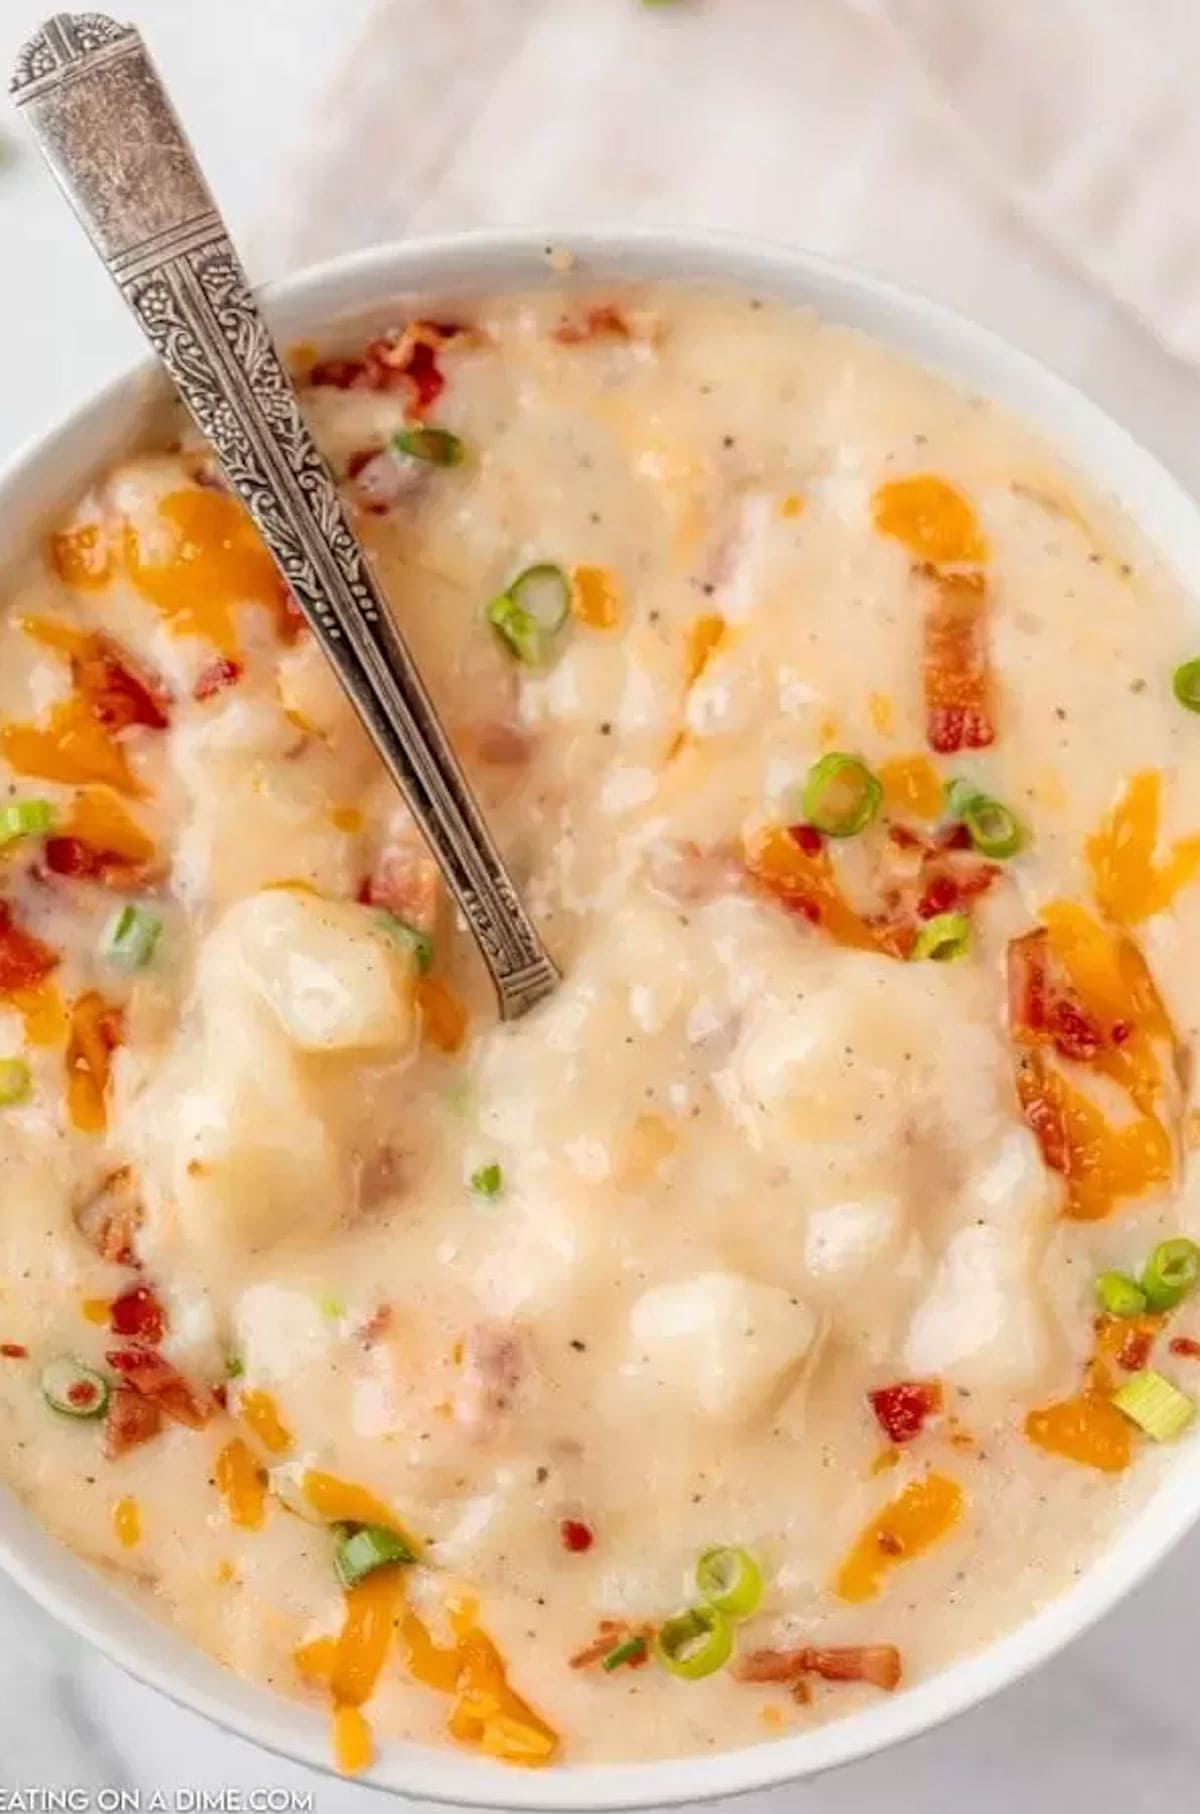 Crockpot potato soup recipe in bowl with cheese, bacon and green onion toppings